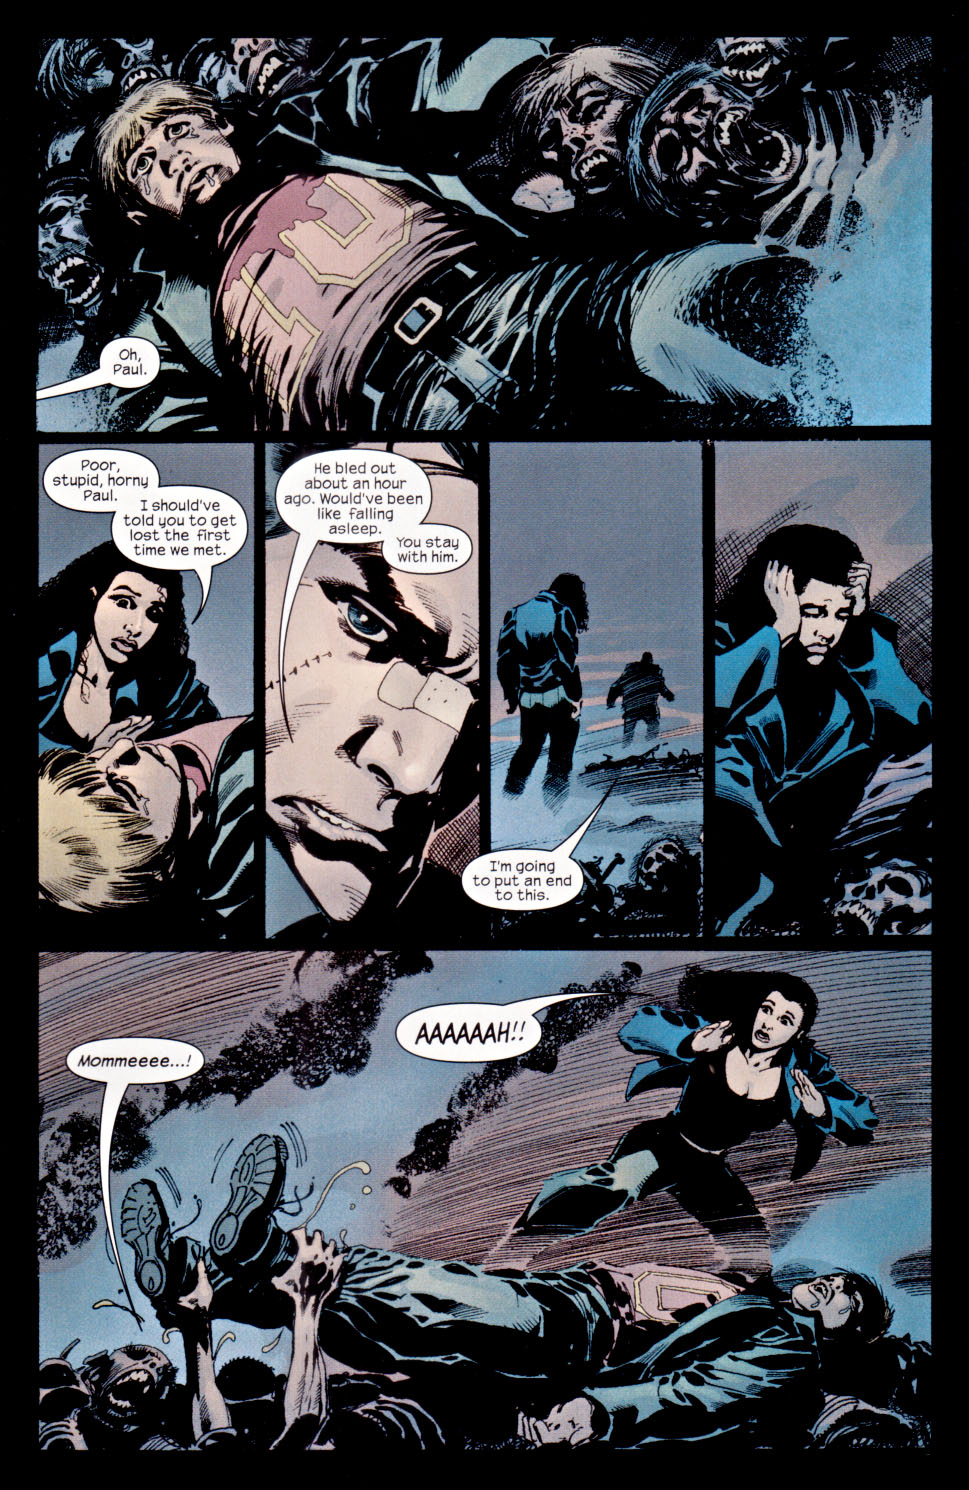 The Punisher (2001) issue 26 - Hidden #03 - Page 12